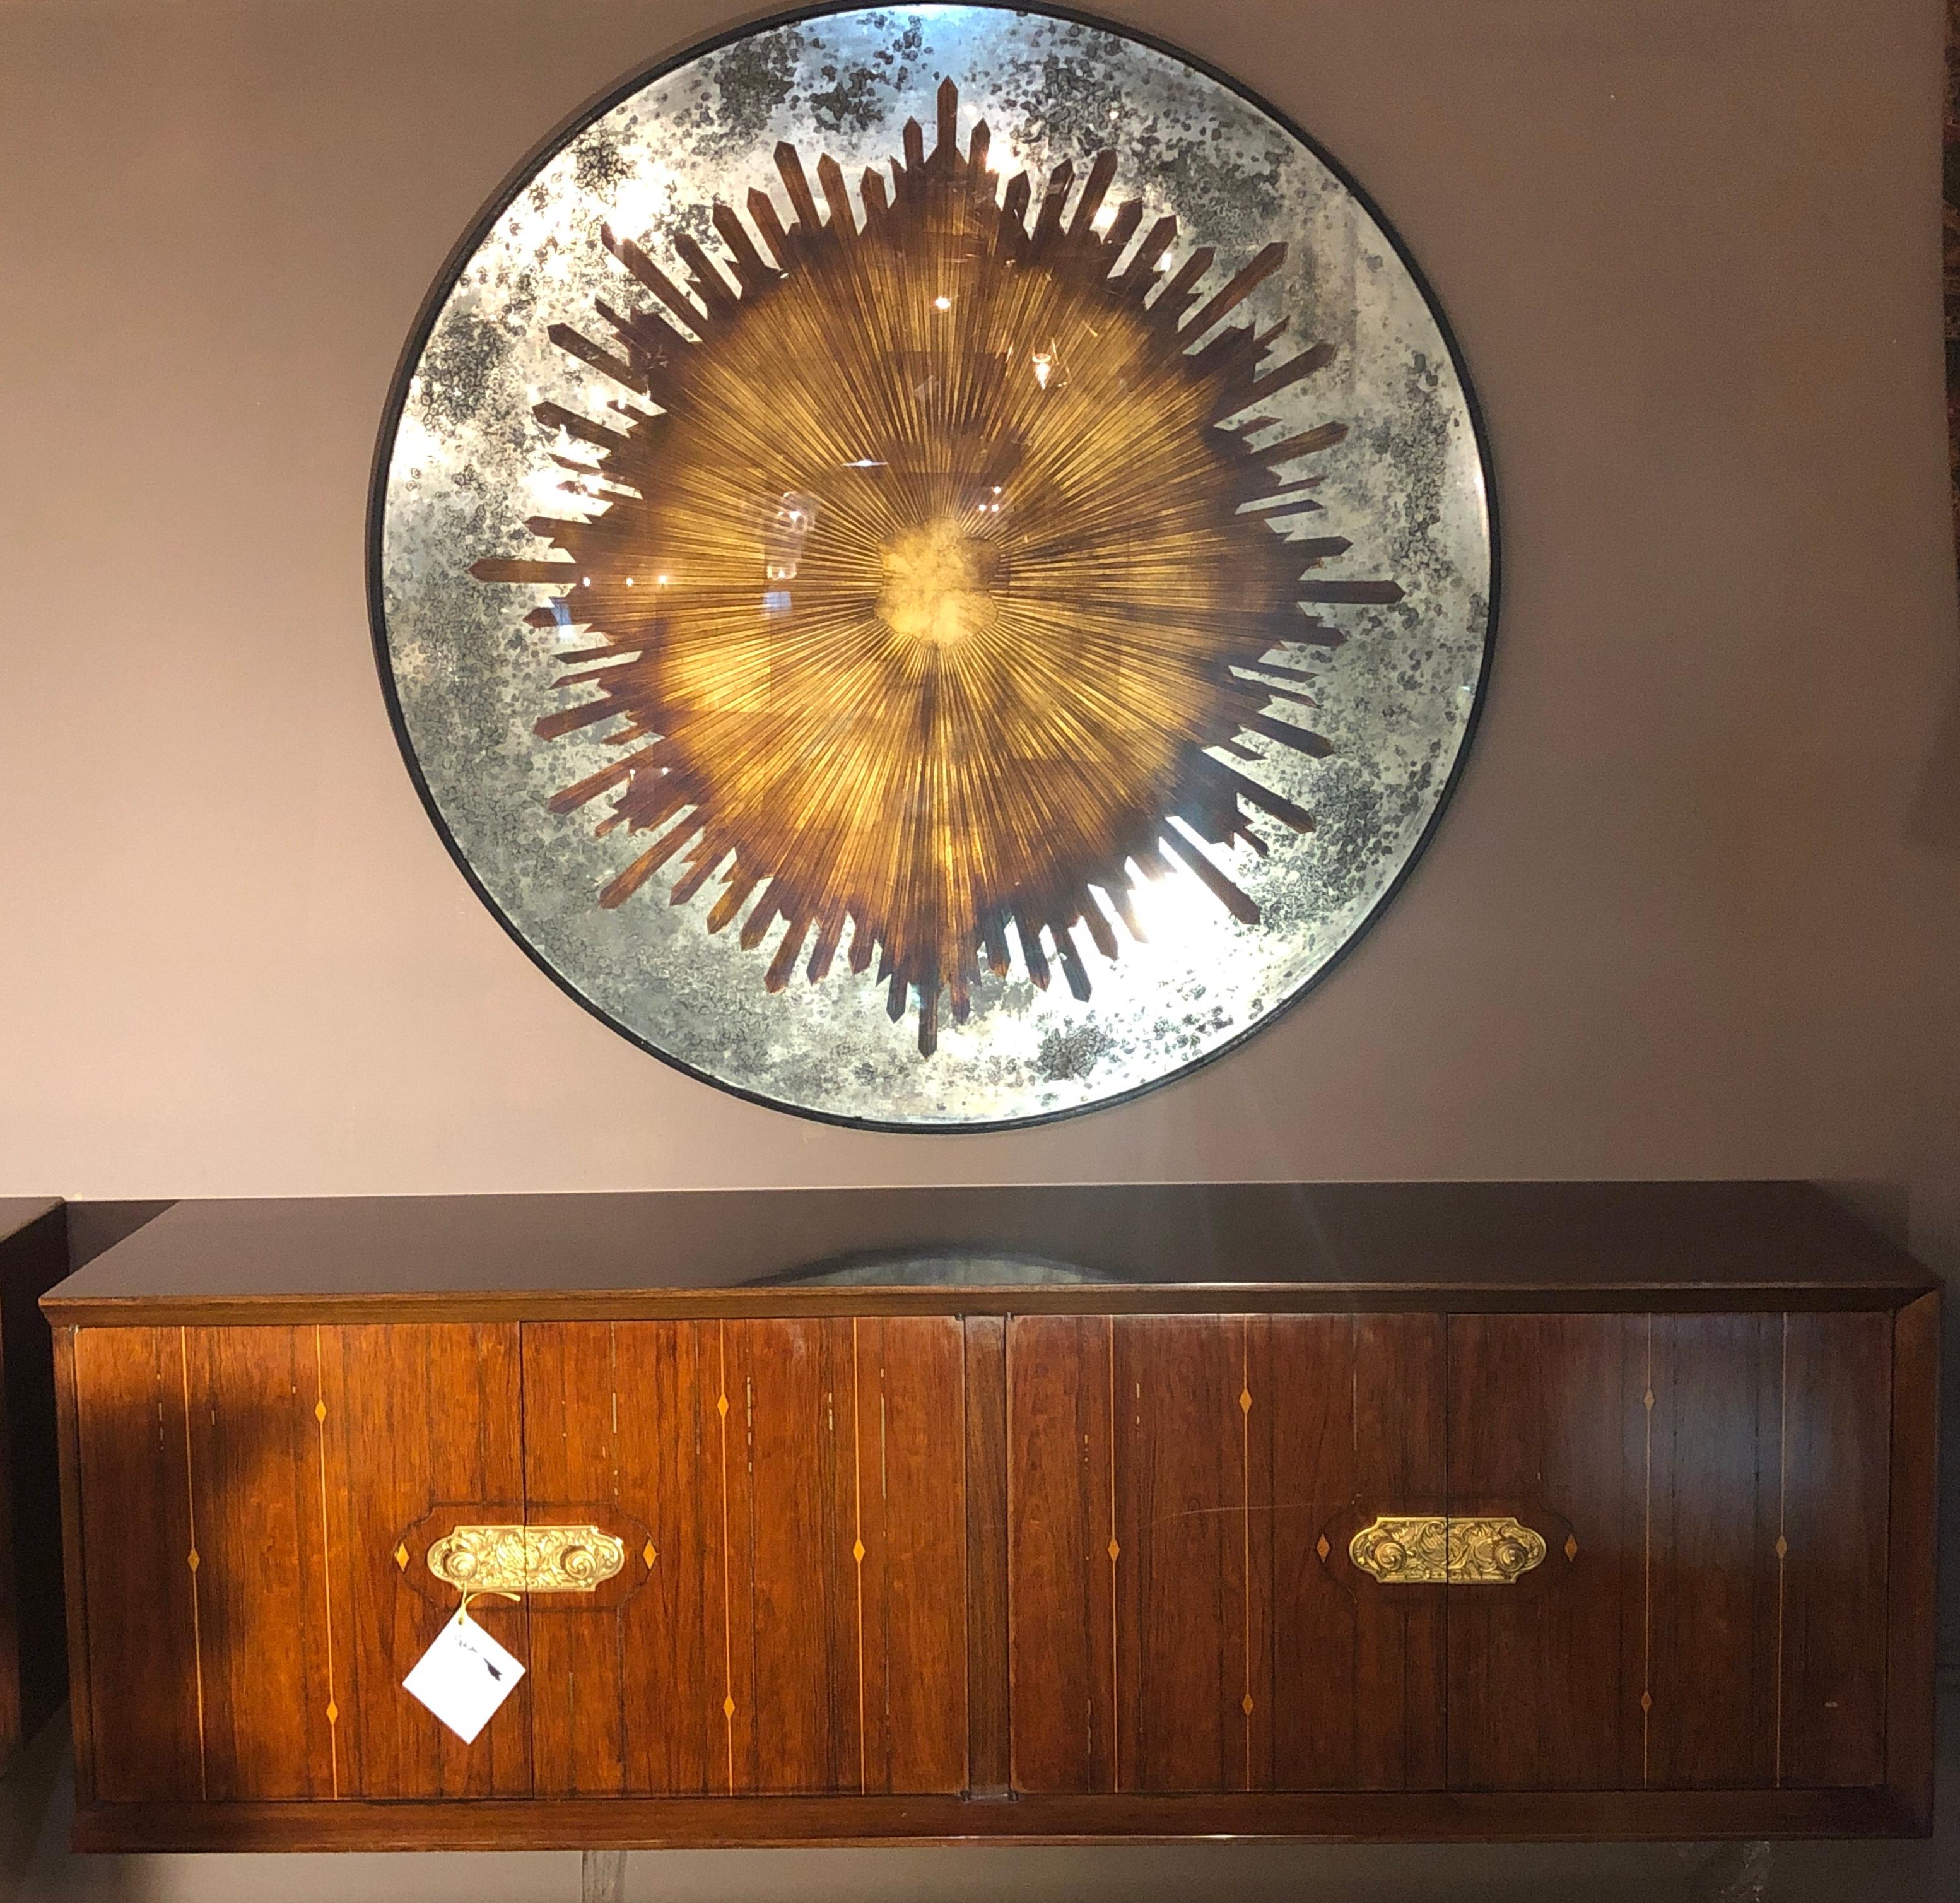 Monumental carved gilt gold and silver glass Art Deco sunburst wall mirror or tabletop. This spectacular finely decorative mirror would make a splash whether hanging on the wall or sitting upon a metal table base. Can easily be used as a centre or